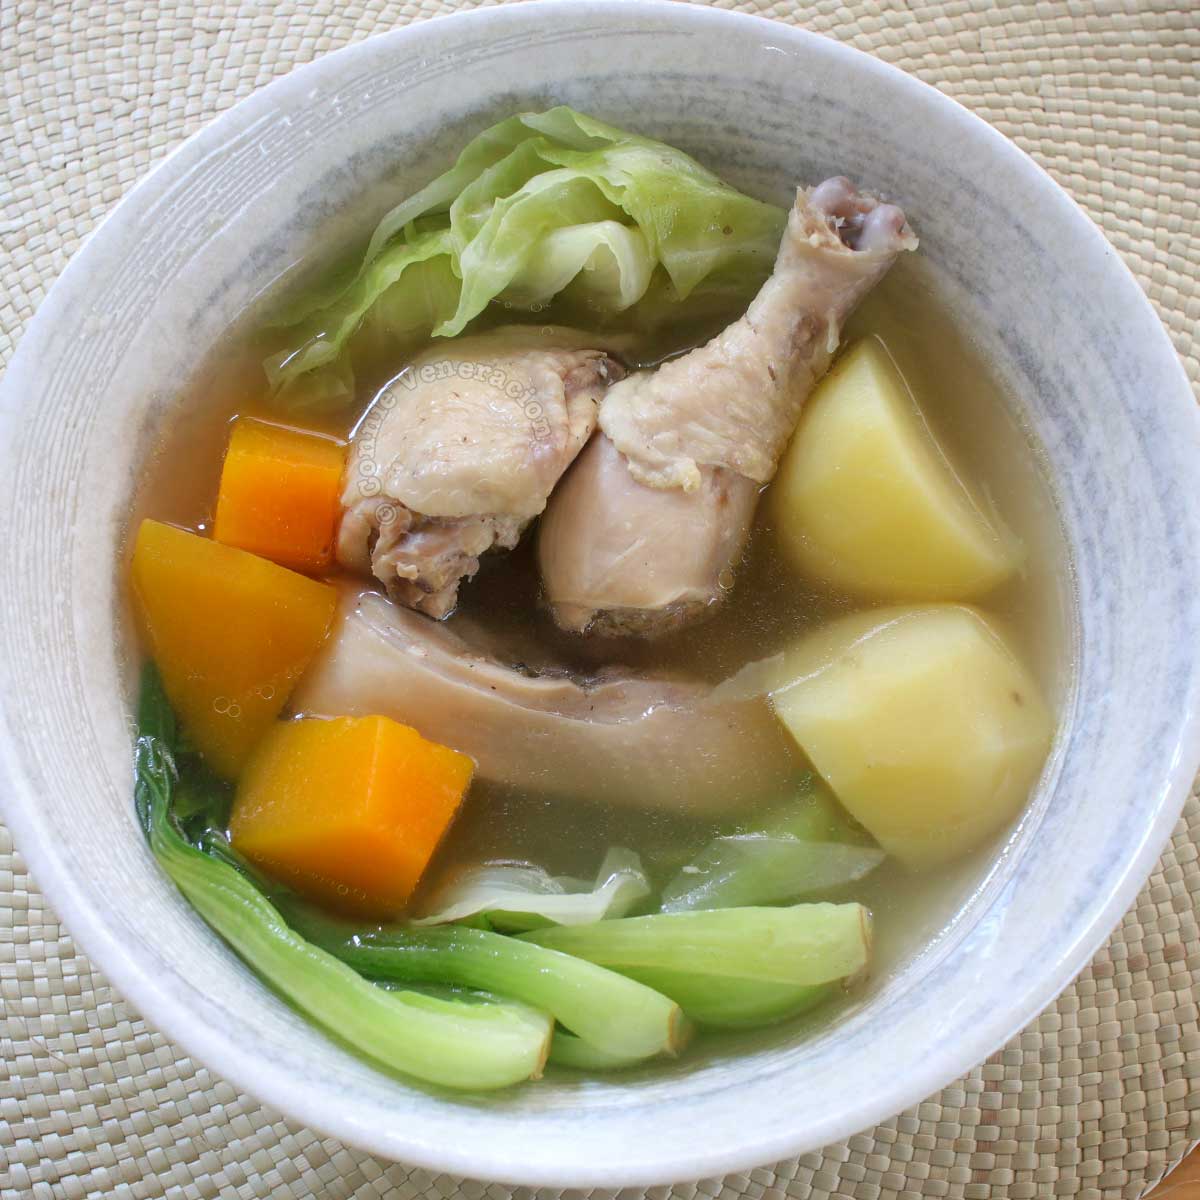 Boiled chicken, cabbage, potatoes, squash and bok choy in serving bowl